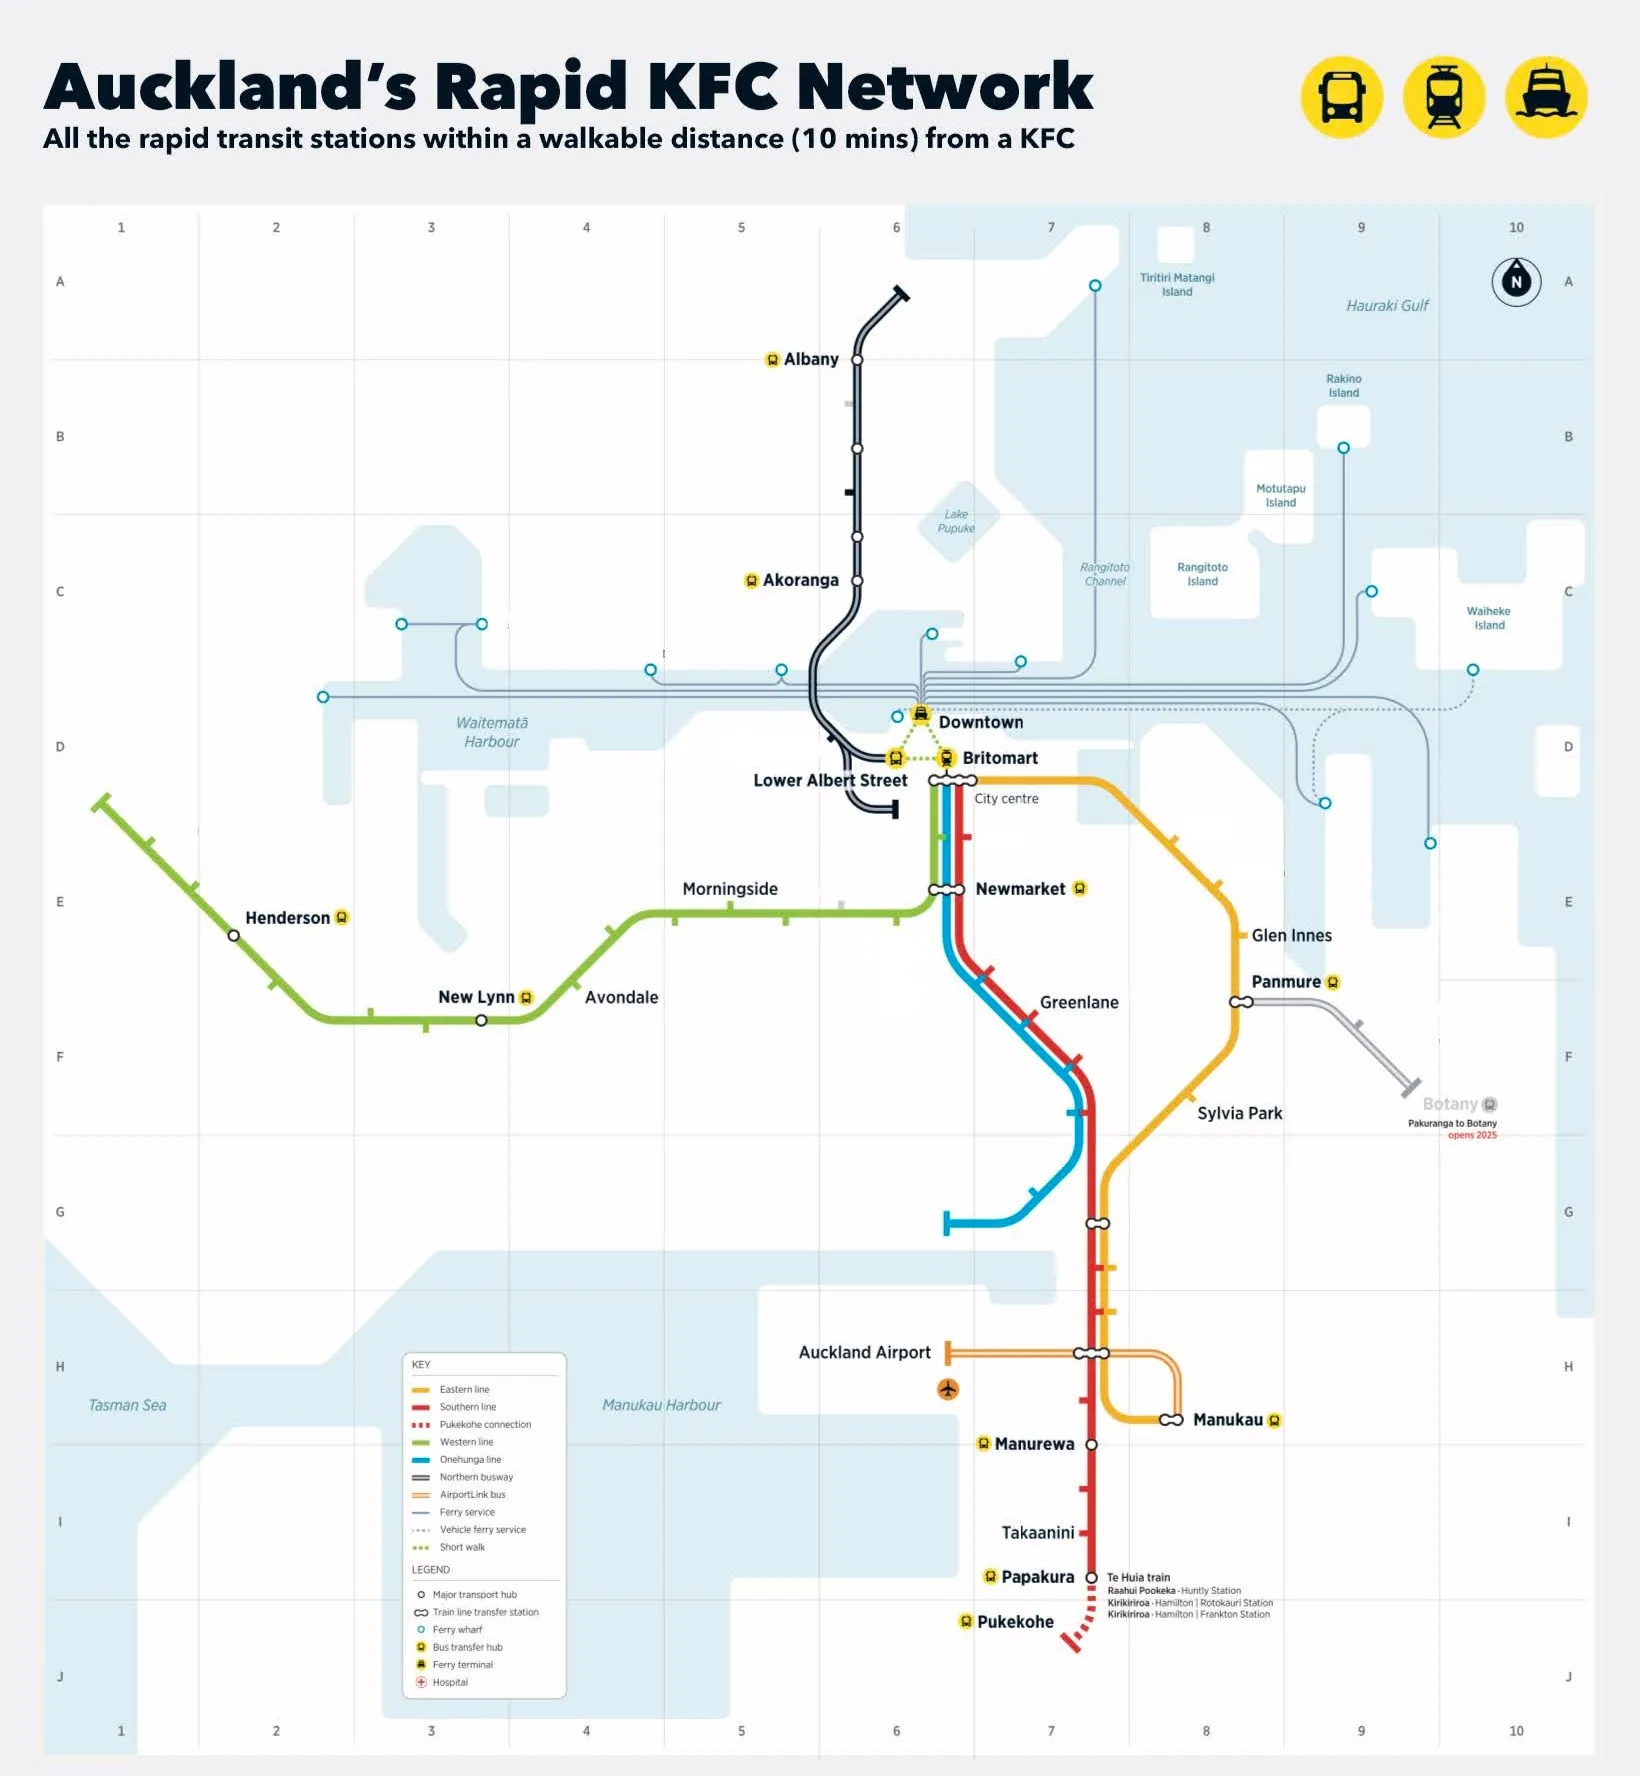 Map of Auckland rapid transit stations within walking distance from a KFC